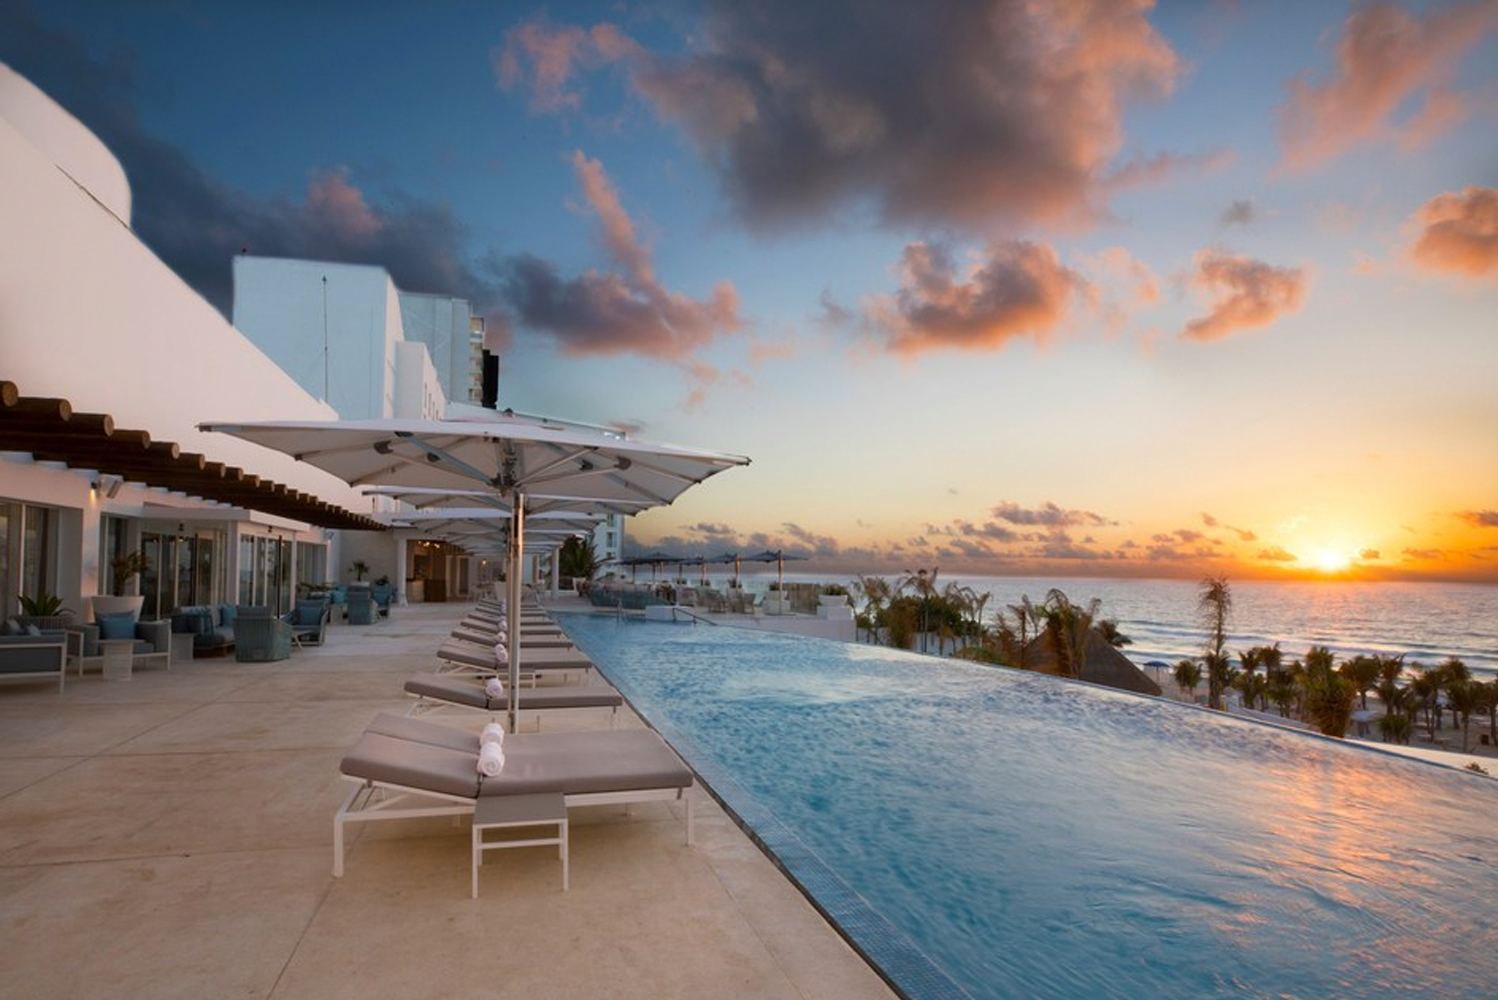 Palace Resorts completed the renovation of Le Blanc Spa Resort Cancun the brands flagship property in Cancun 